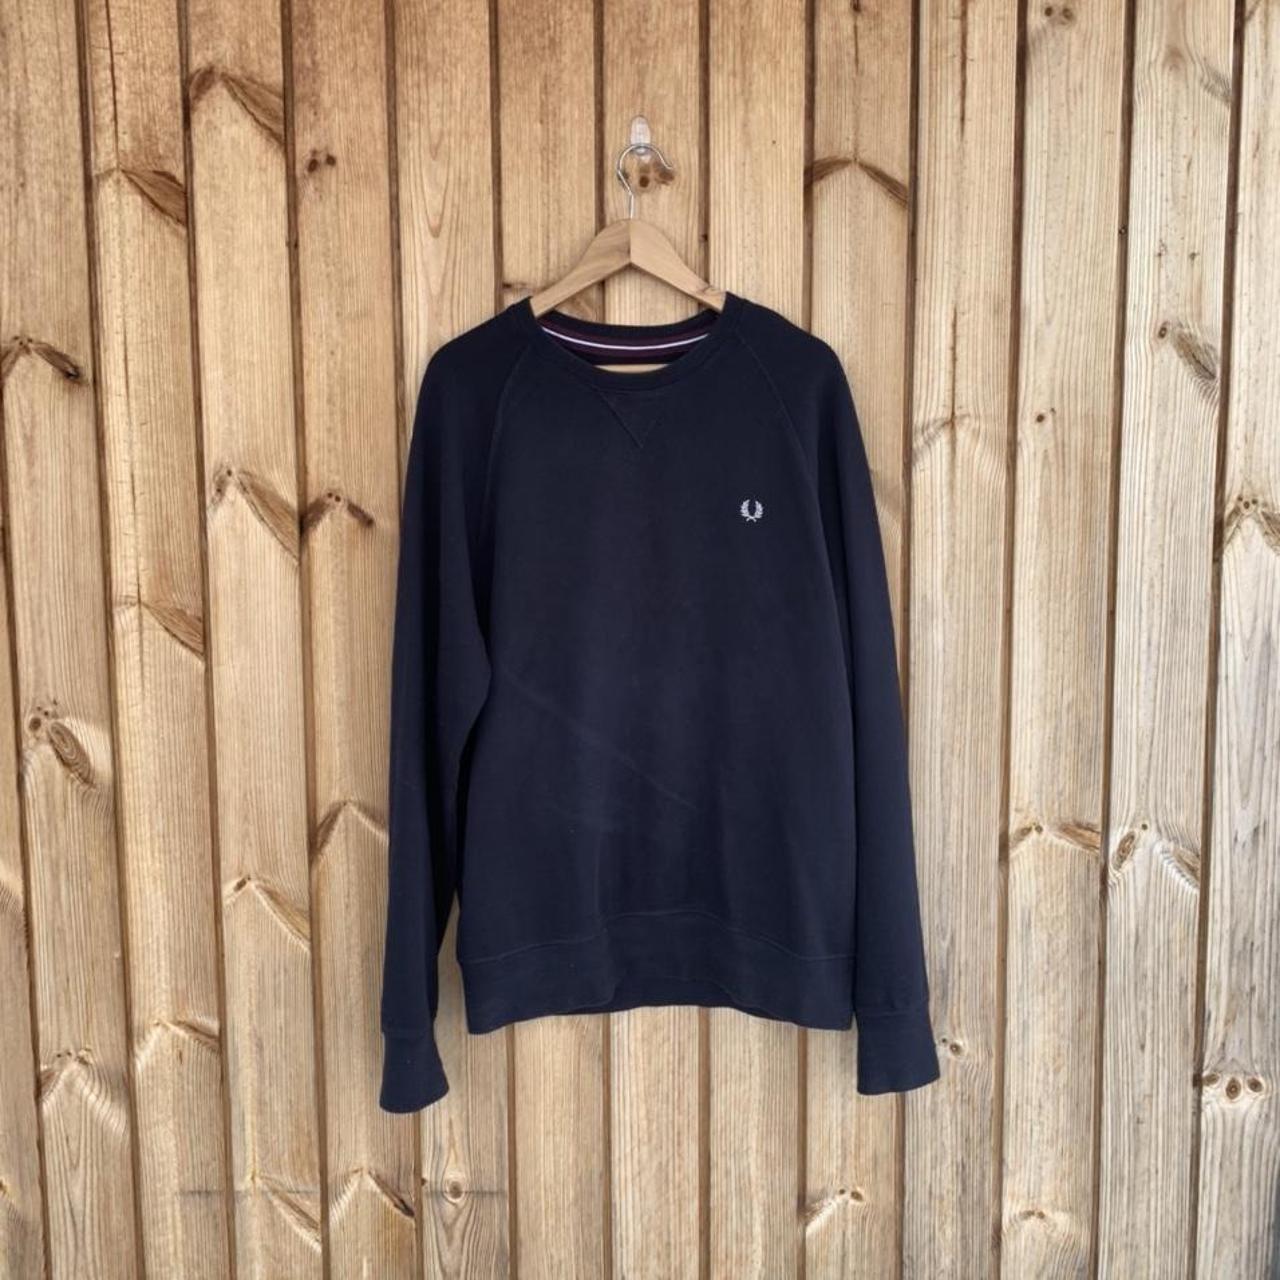 PRODUCT DETAILS Fred Perry Round Neck... - Depop